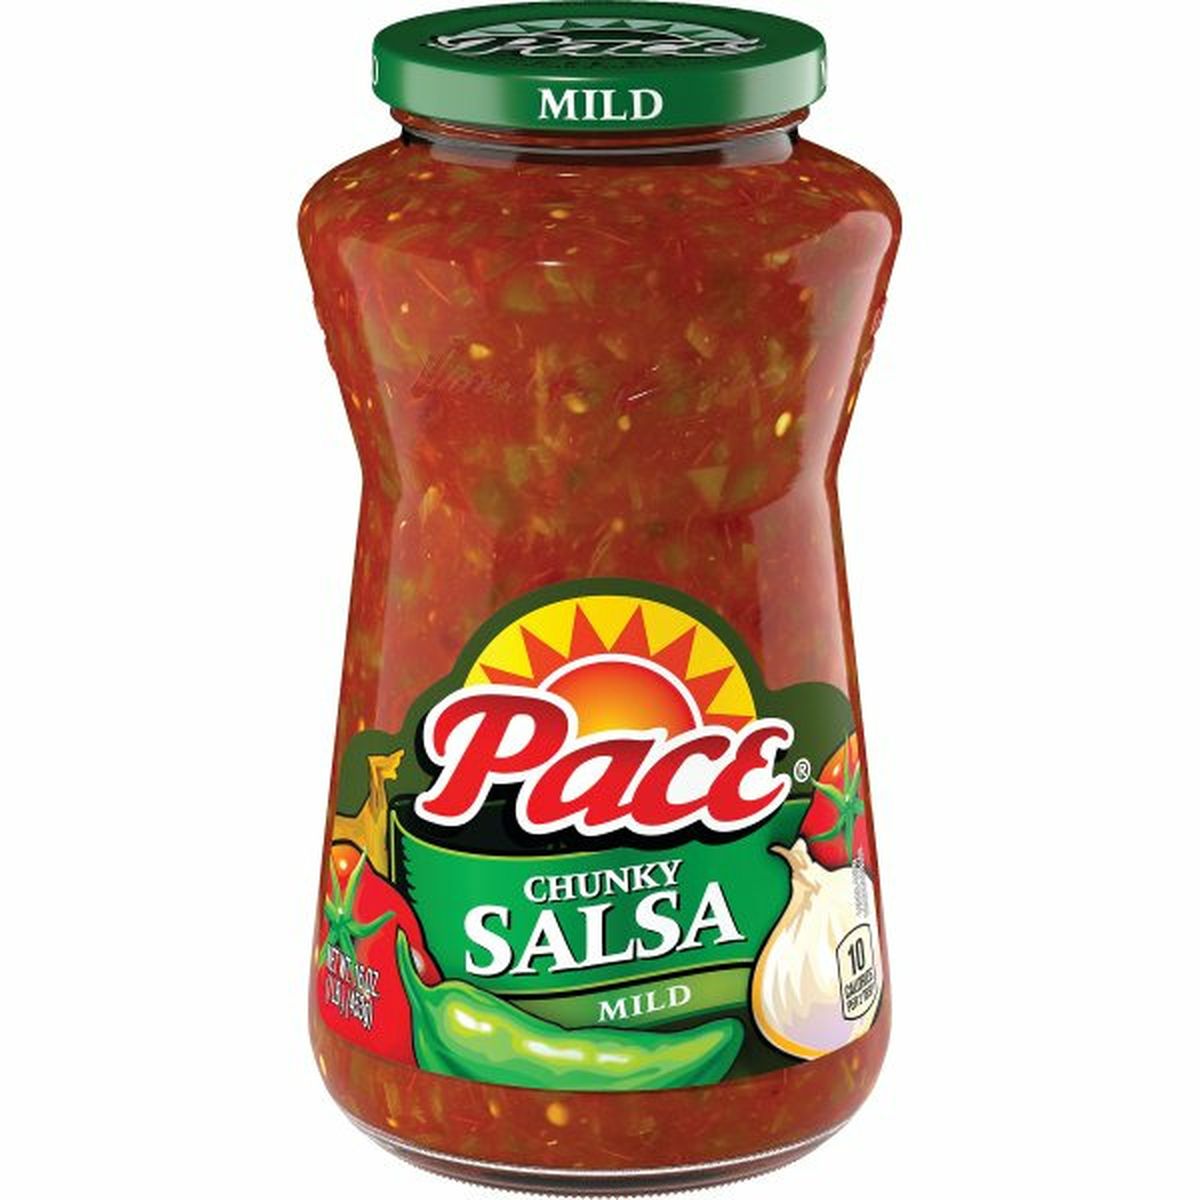 Calories in Paces Mild Chunky Salsa